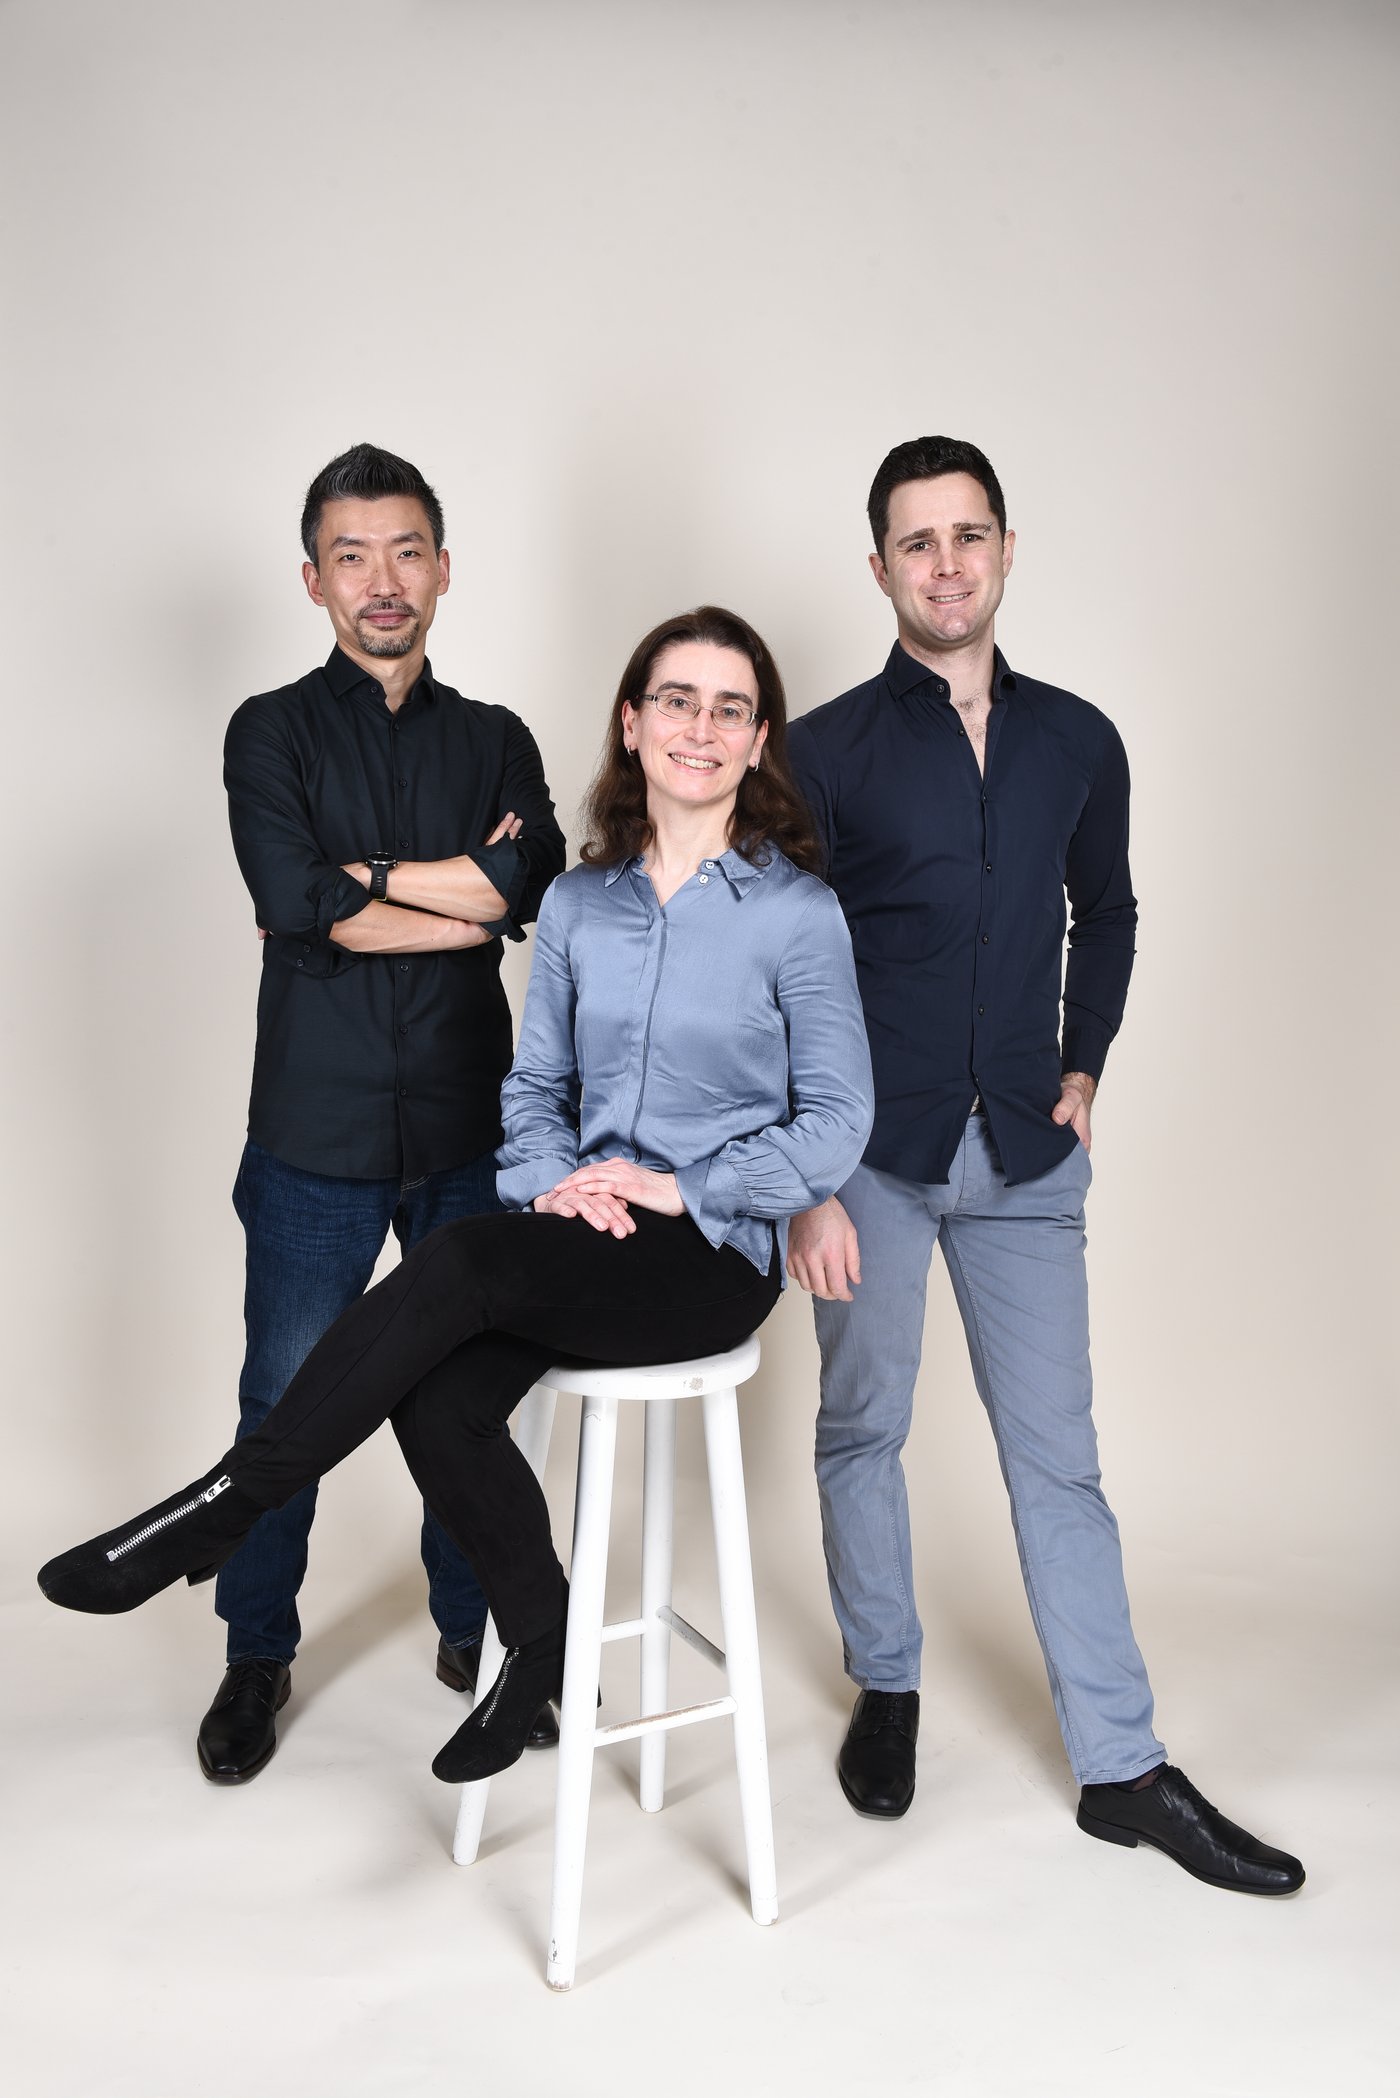 The picture of the Panadea team in front of a light beige background: A young woman with medium-length brown hair, a light blue blouse and black jeans is sitting on a white bar stool. Behind her are two young men in dark shirts and jeans.